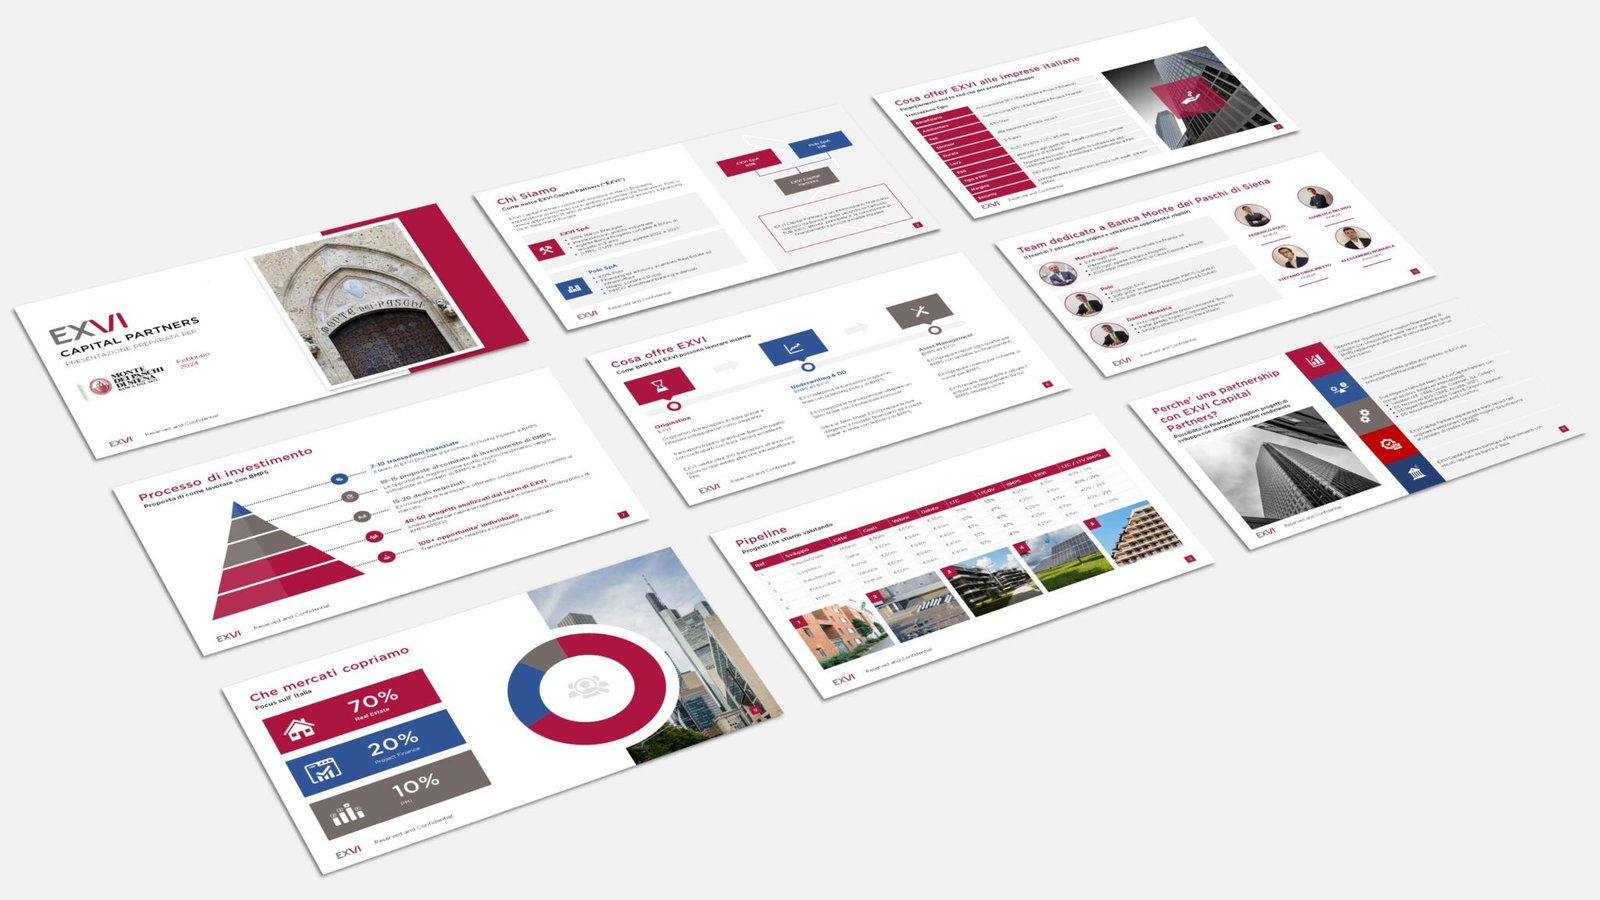 The image shows a collection of slides from a presentation portfolio for EXVI Capital Partners. The slides feature a professional and clean design with a red and white color scheme that aligns with the company's branding. Various elements such as charts, graphs, and images are neatly organized to present information in an easily digestible format. Text sections are concise and focused, providing key insights into EXVI's offerings, investment processes, market coverage, and dedicated team. The overall layout is structured to guide the viewer through EXVI's narrative in a logical progression, emphasizing its strategic approach to finance.